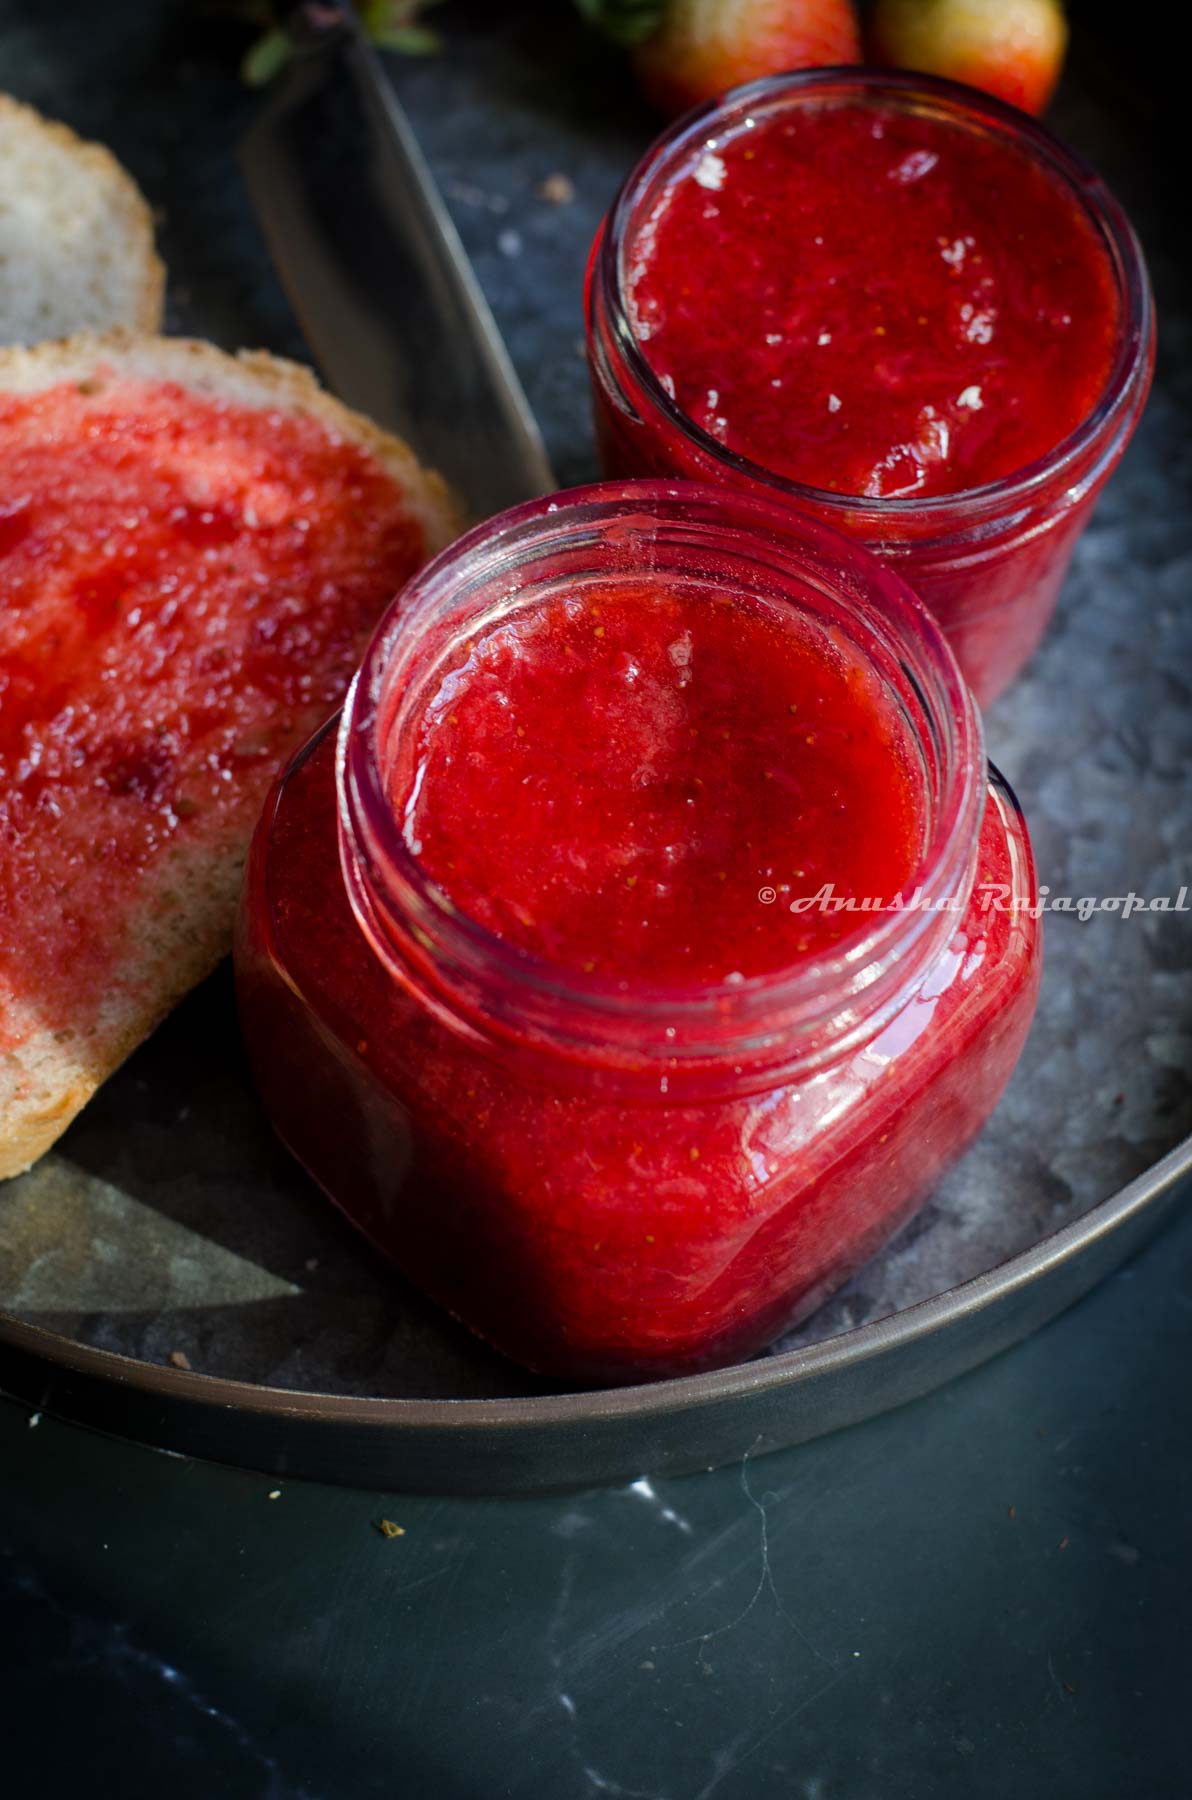 Easy 4 ingredient instant pot strawberry jam in small glass jars. A slice of bread smeared with jam on top by the side. Some strawberries at the back. A bread knife beside the jars.